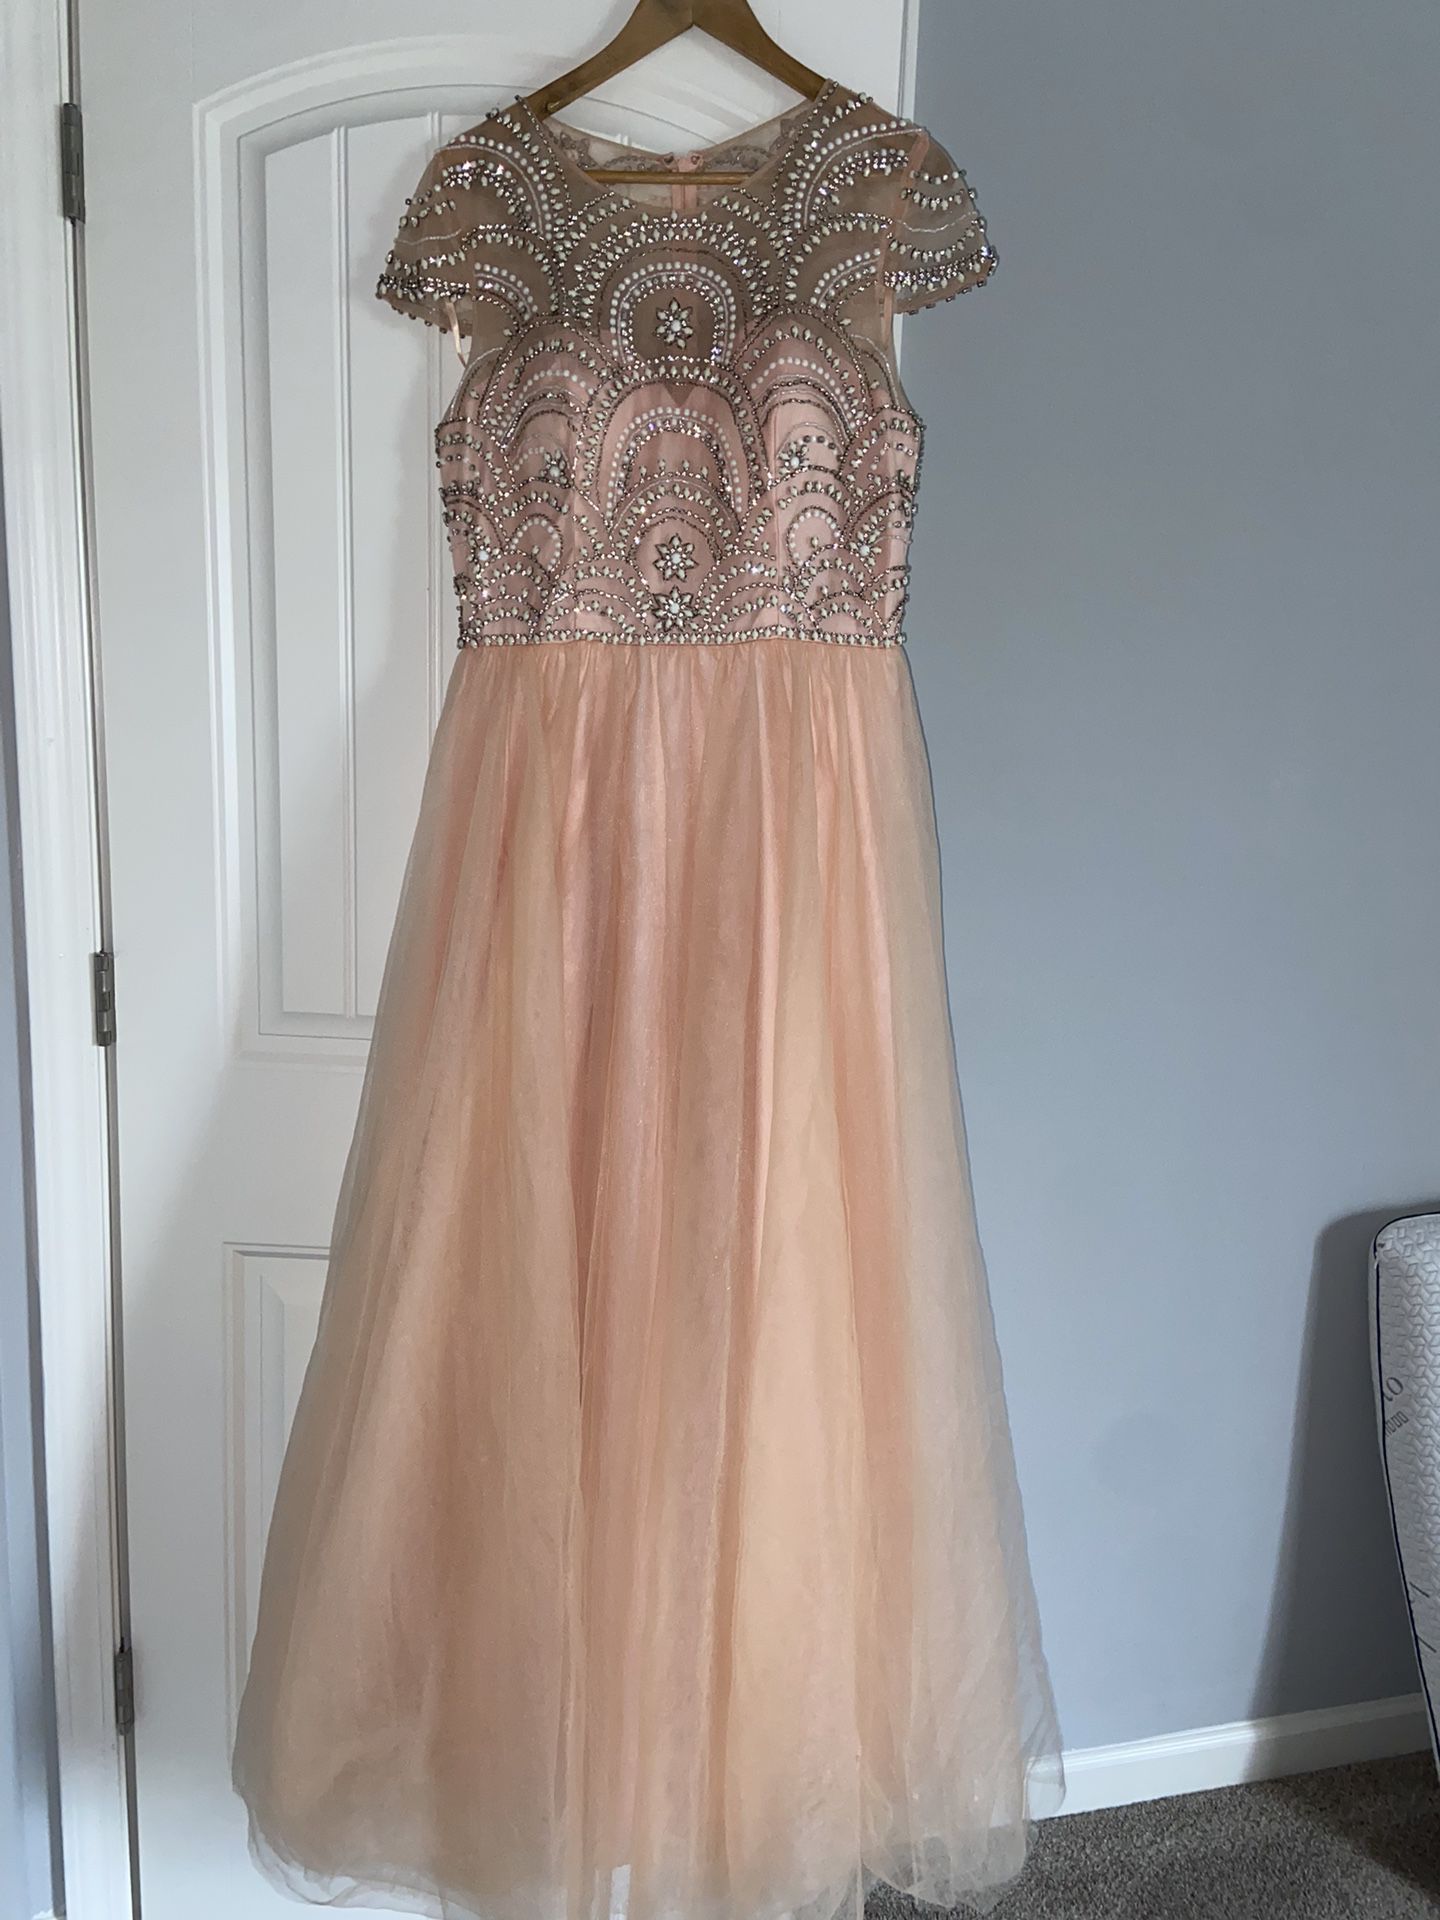 Beautiful Beaded Special Occasion Dress 